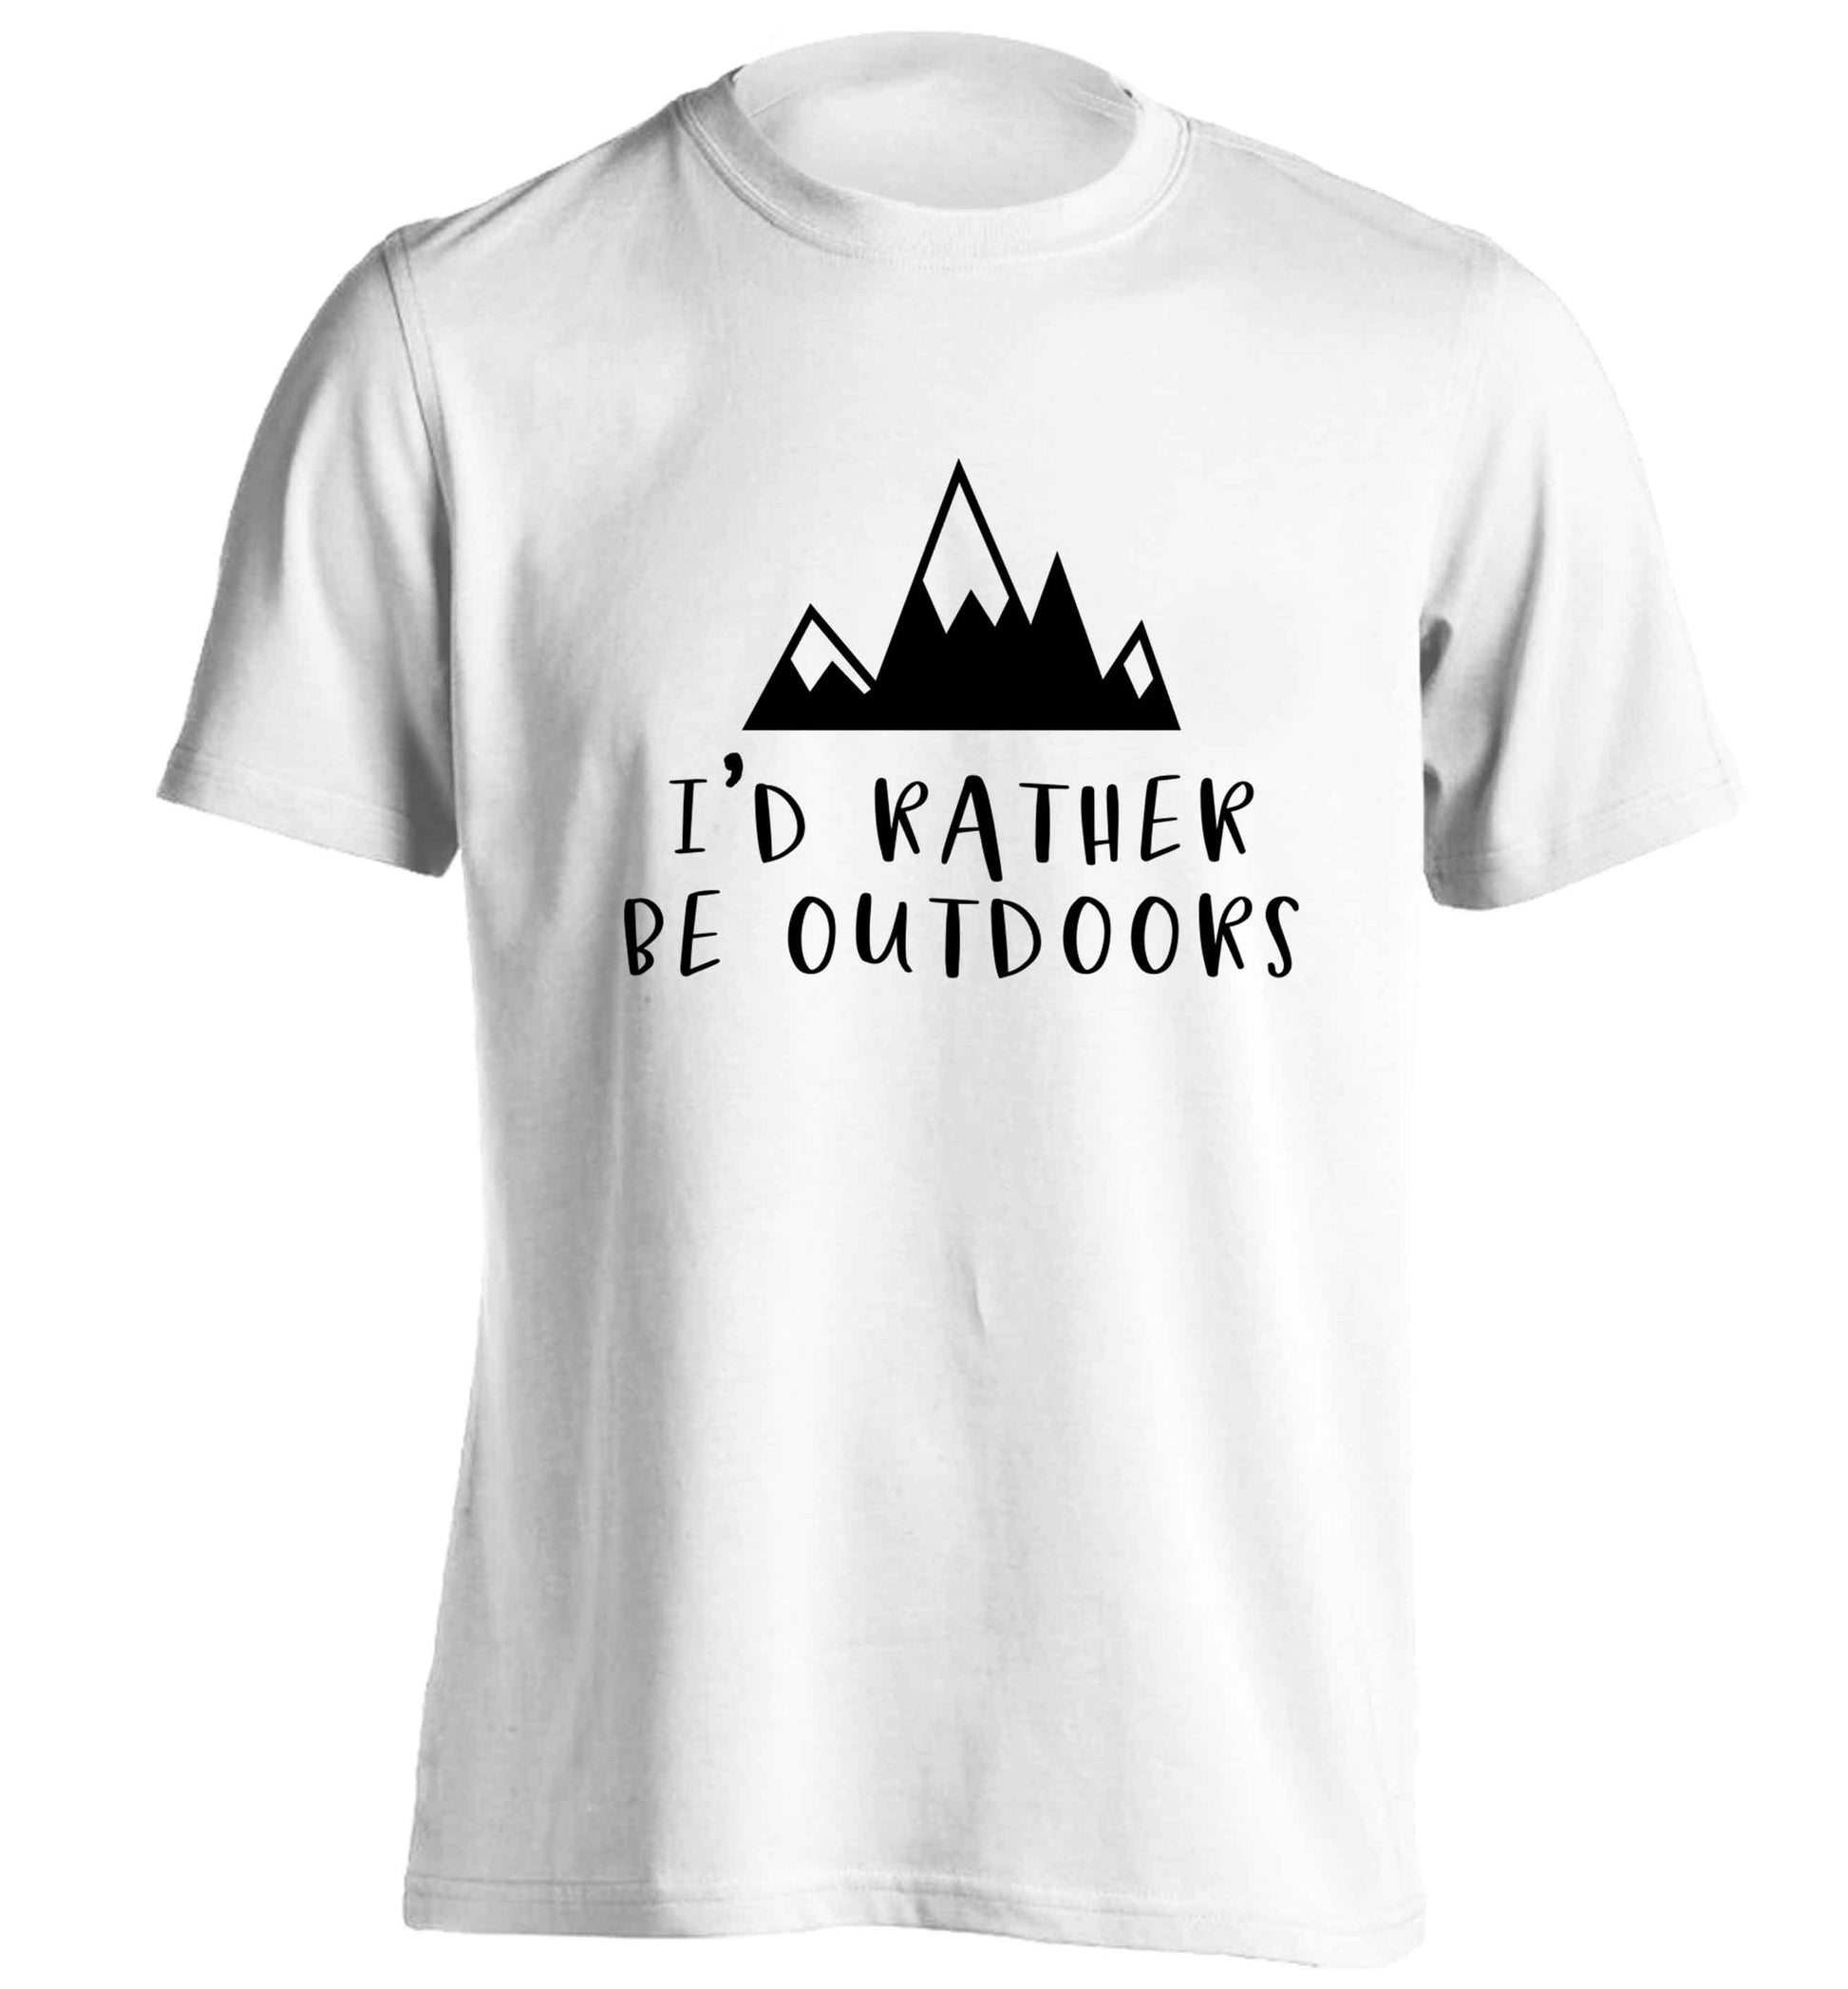 I'd rather be outdoors adults unisex white Tshirt 2XL